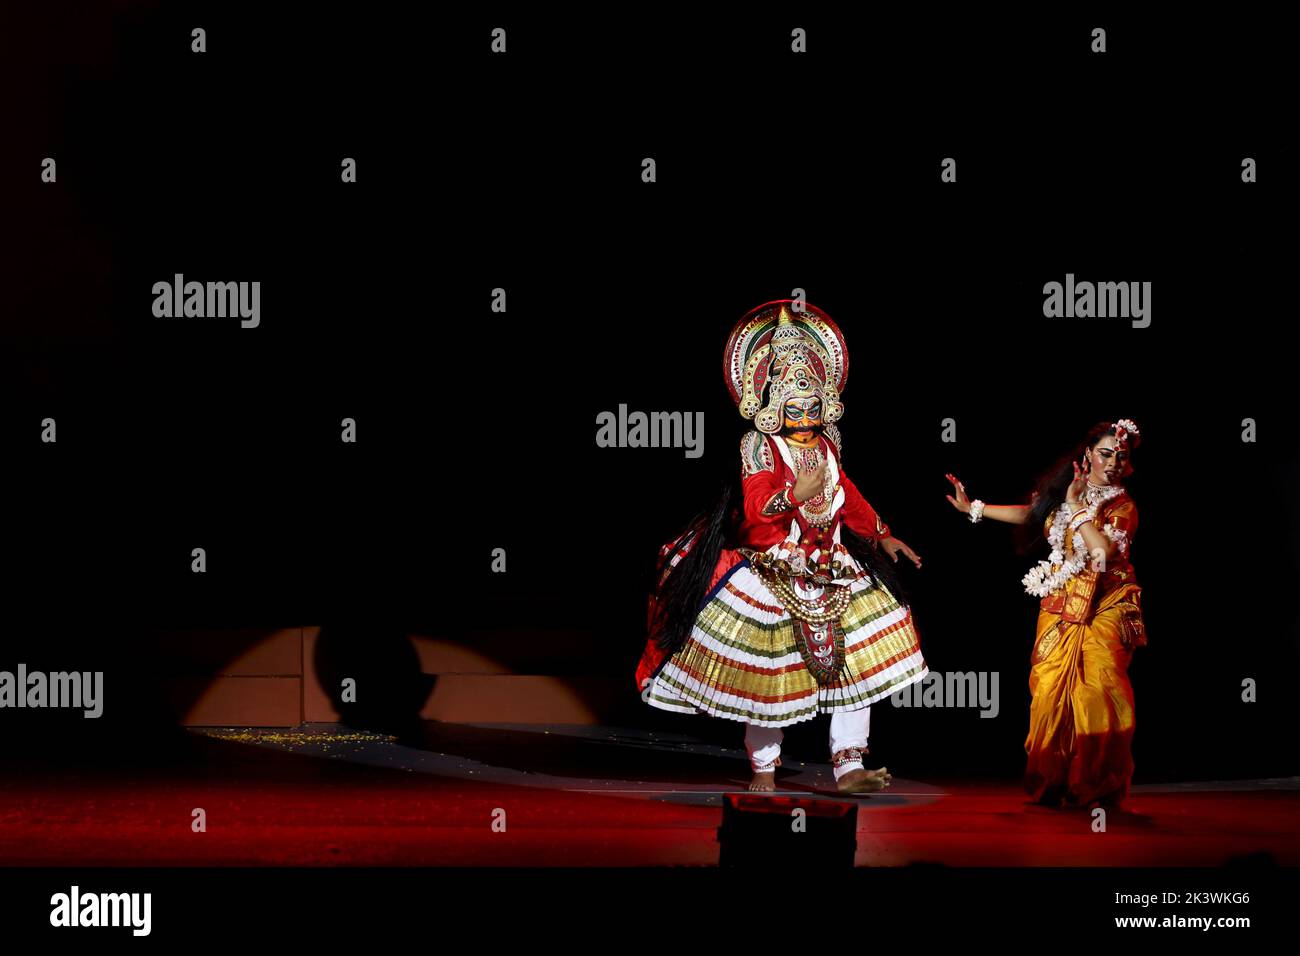 Artists perform in the roles of Sita (R), the wife of Hindu god Rama, and his rival Ravana (L), ?in the 'Ramlila,' a 10-day enactment of the life of Hindu deity Rama which culminates in the festival of Dussehra, organised by Shriram Bharatiya Kala Kendra. The 10 days are also known as the Vijayadashami celebration, at the end of Navratri every year. The day marks Lord Ram's defeat over the evil king of the demons, Ravana. Stock Photo